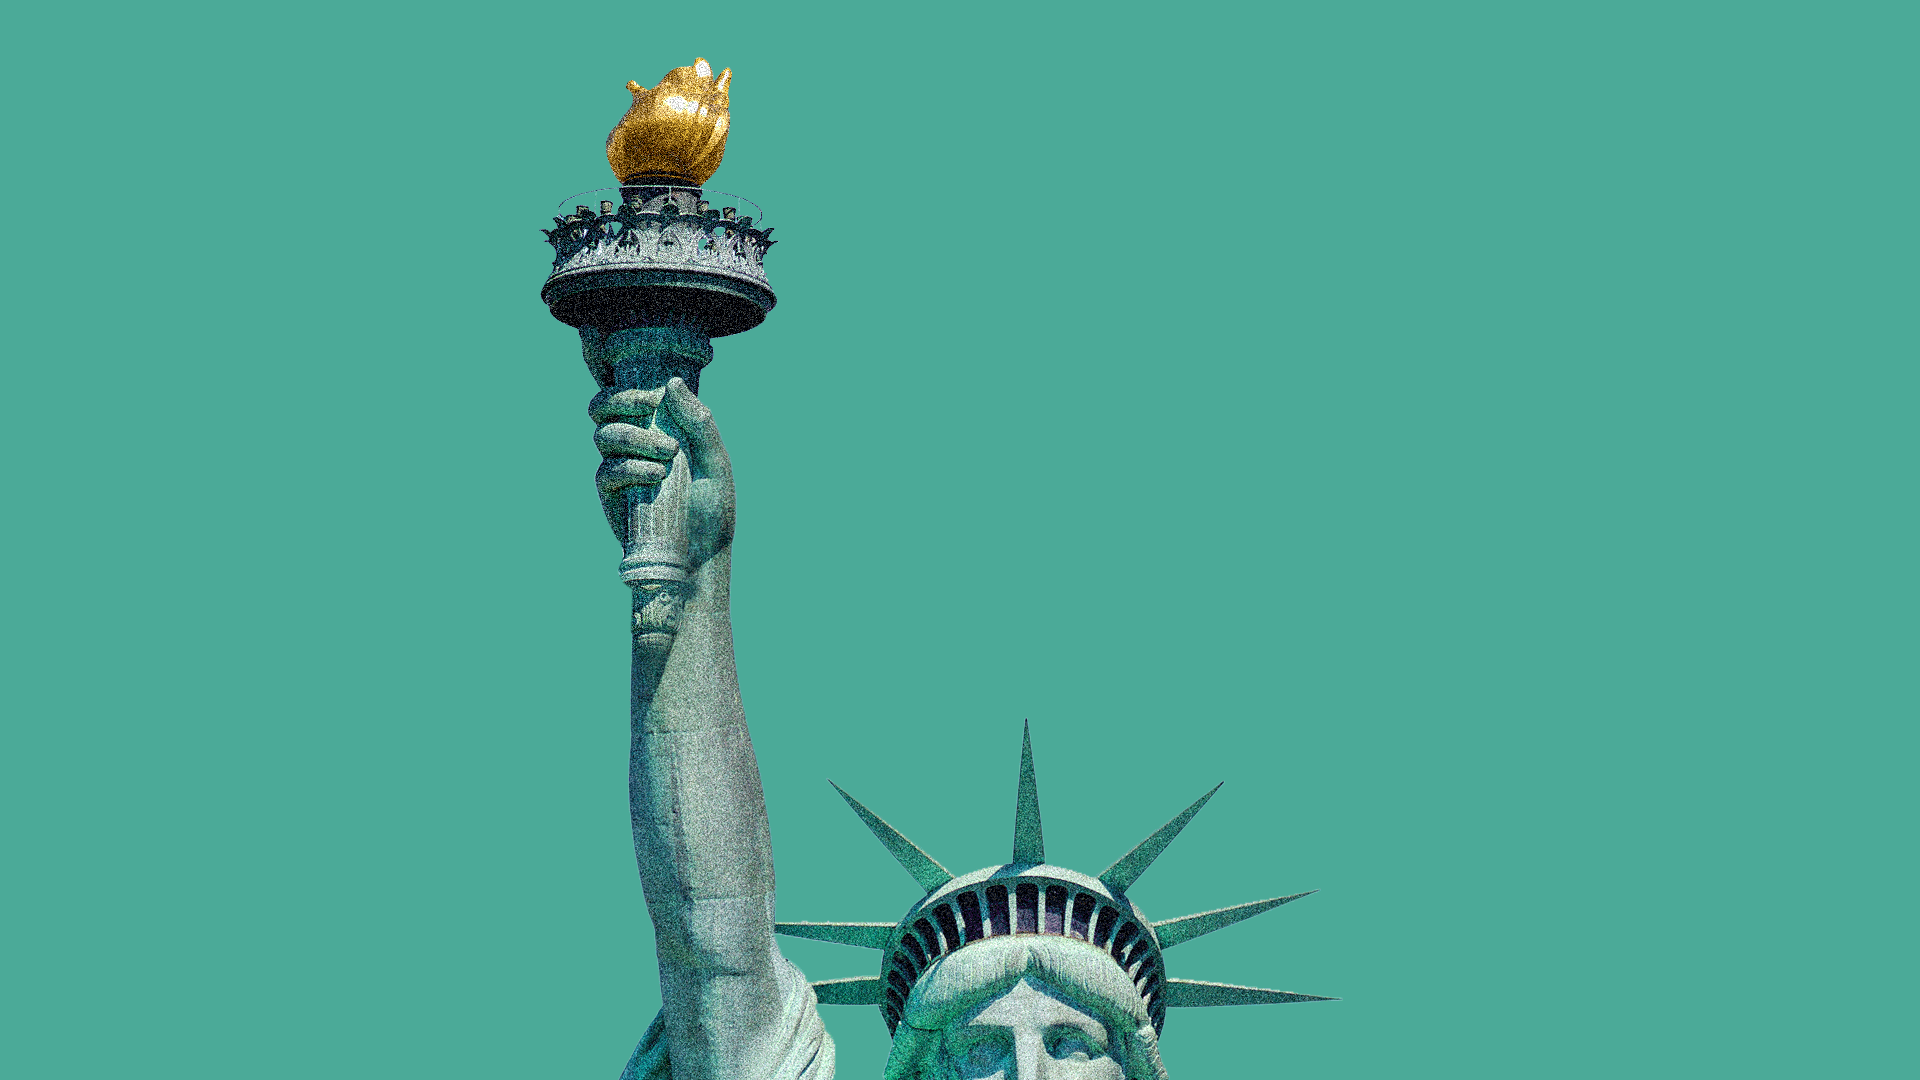 Illustration of Statue of Liberty with fire and gavel in hand before green background.